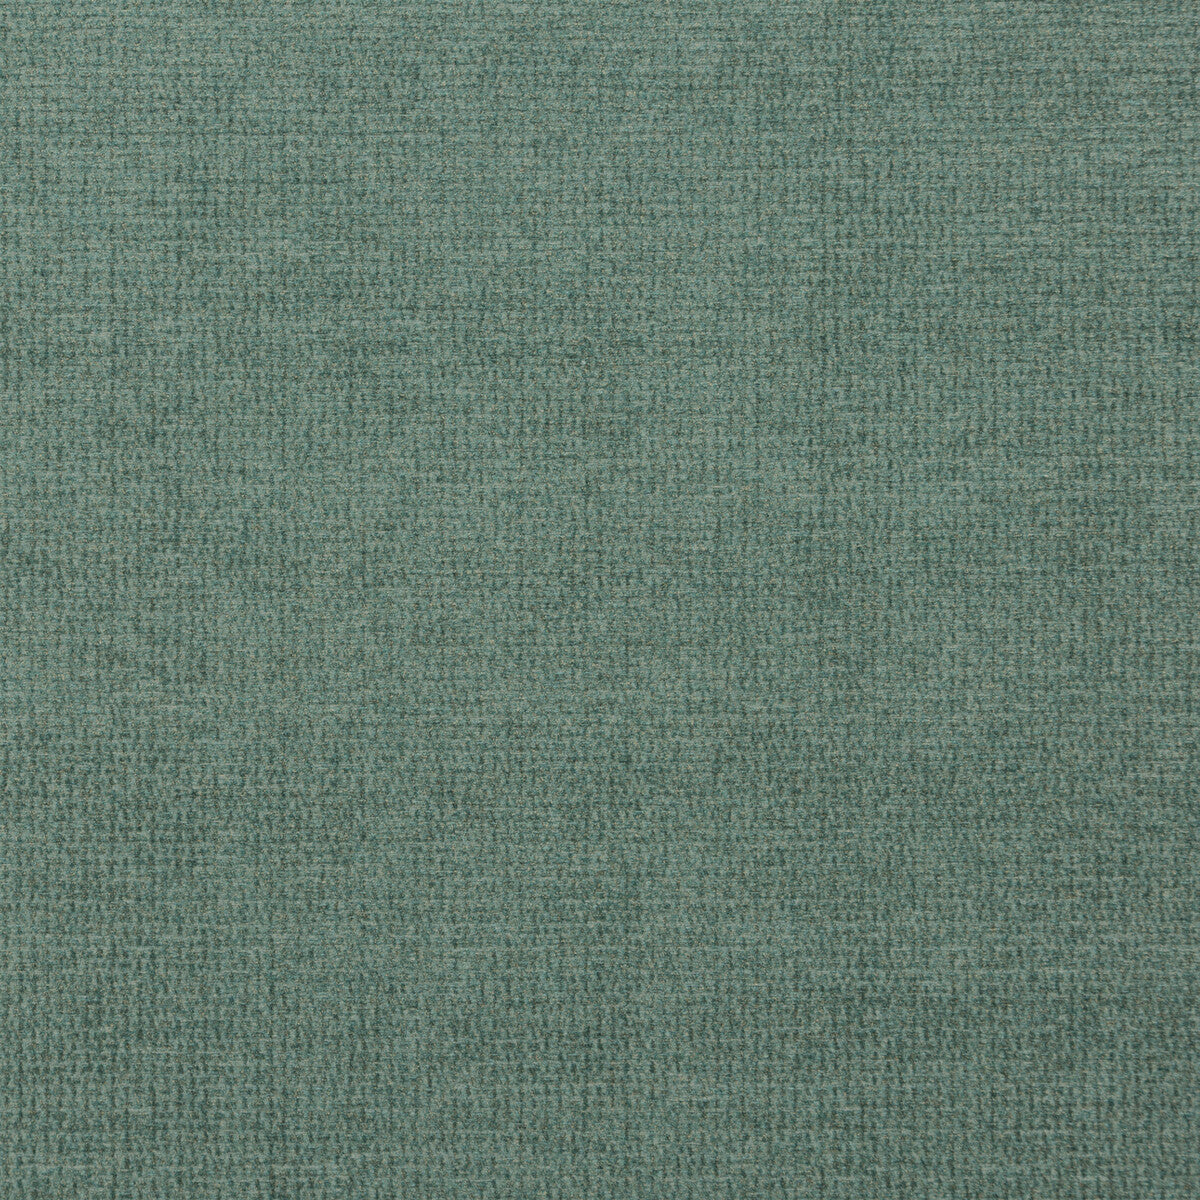 Matrix fabric in verdigris color - pattern BF10686.774.0 - by G P &amp; J Baker in the Essential Colours collection